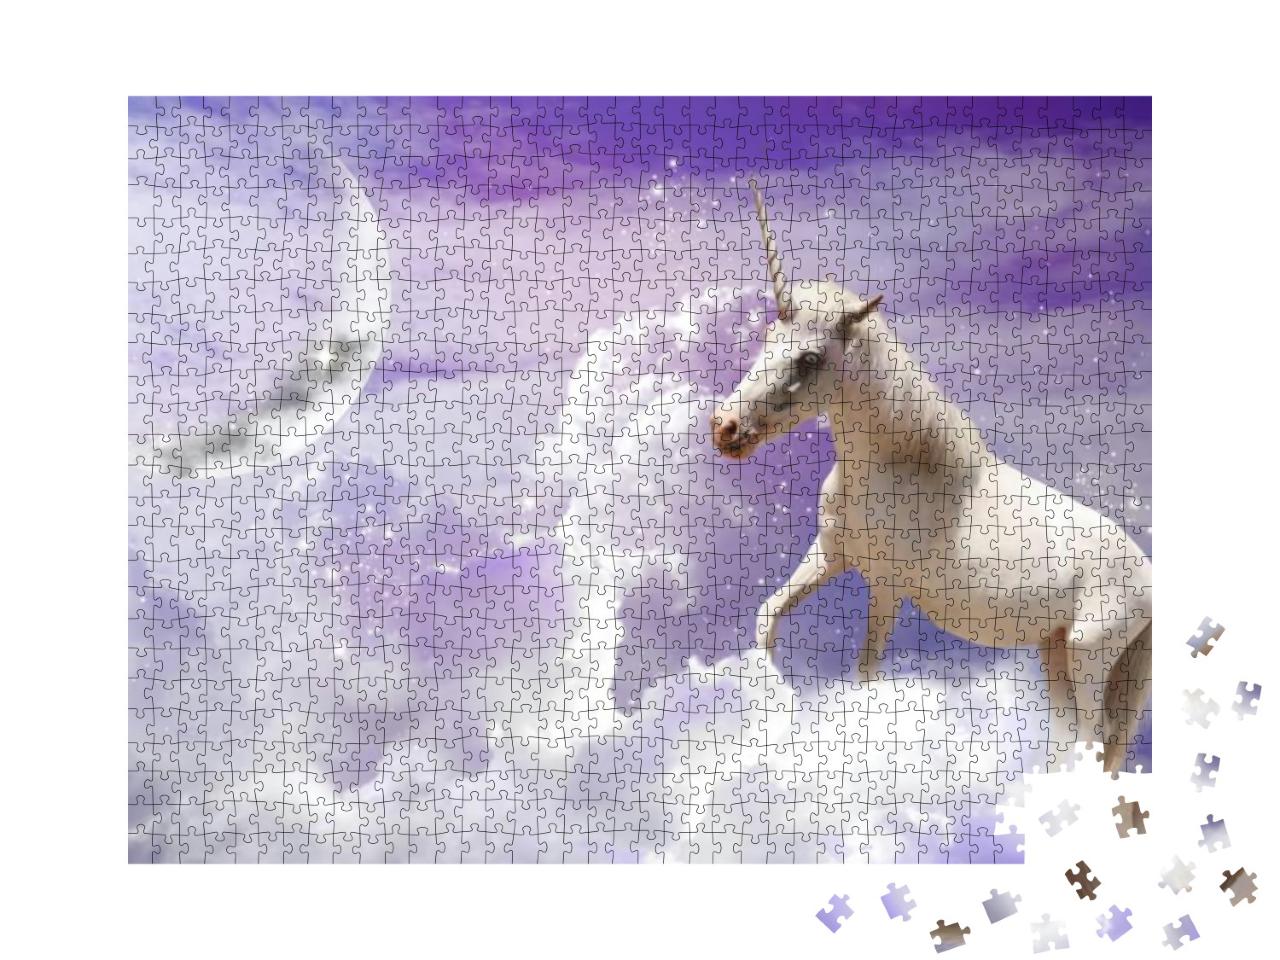 Magic Unicorn in Fantastic Sky with Fluffy Clouds & Cresc... Jigsaw Puzzle with 1000 pieces